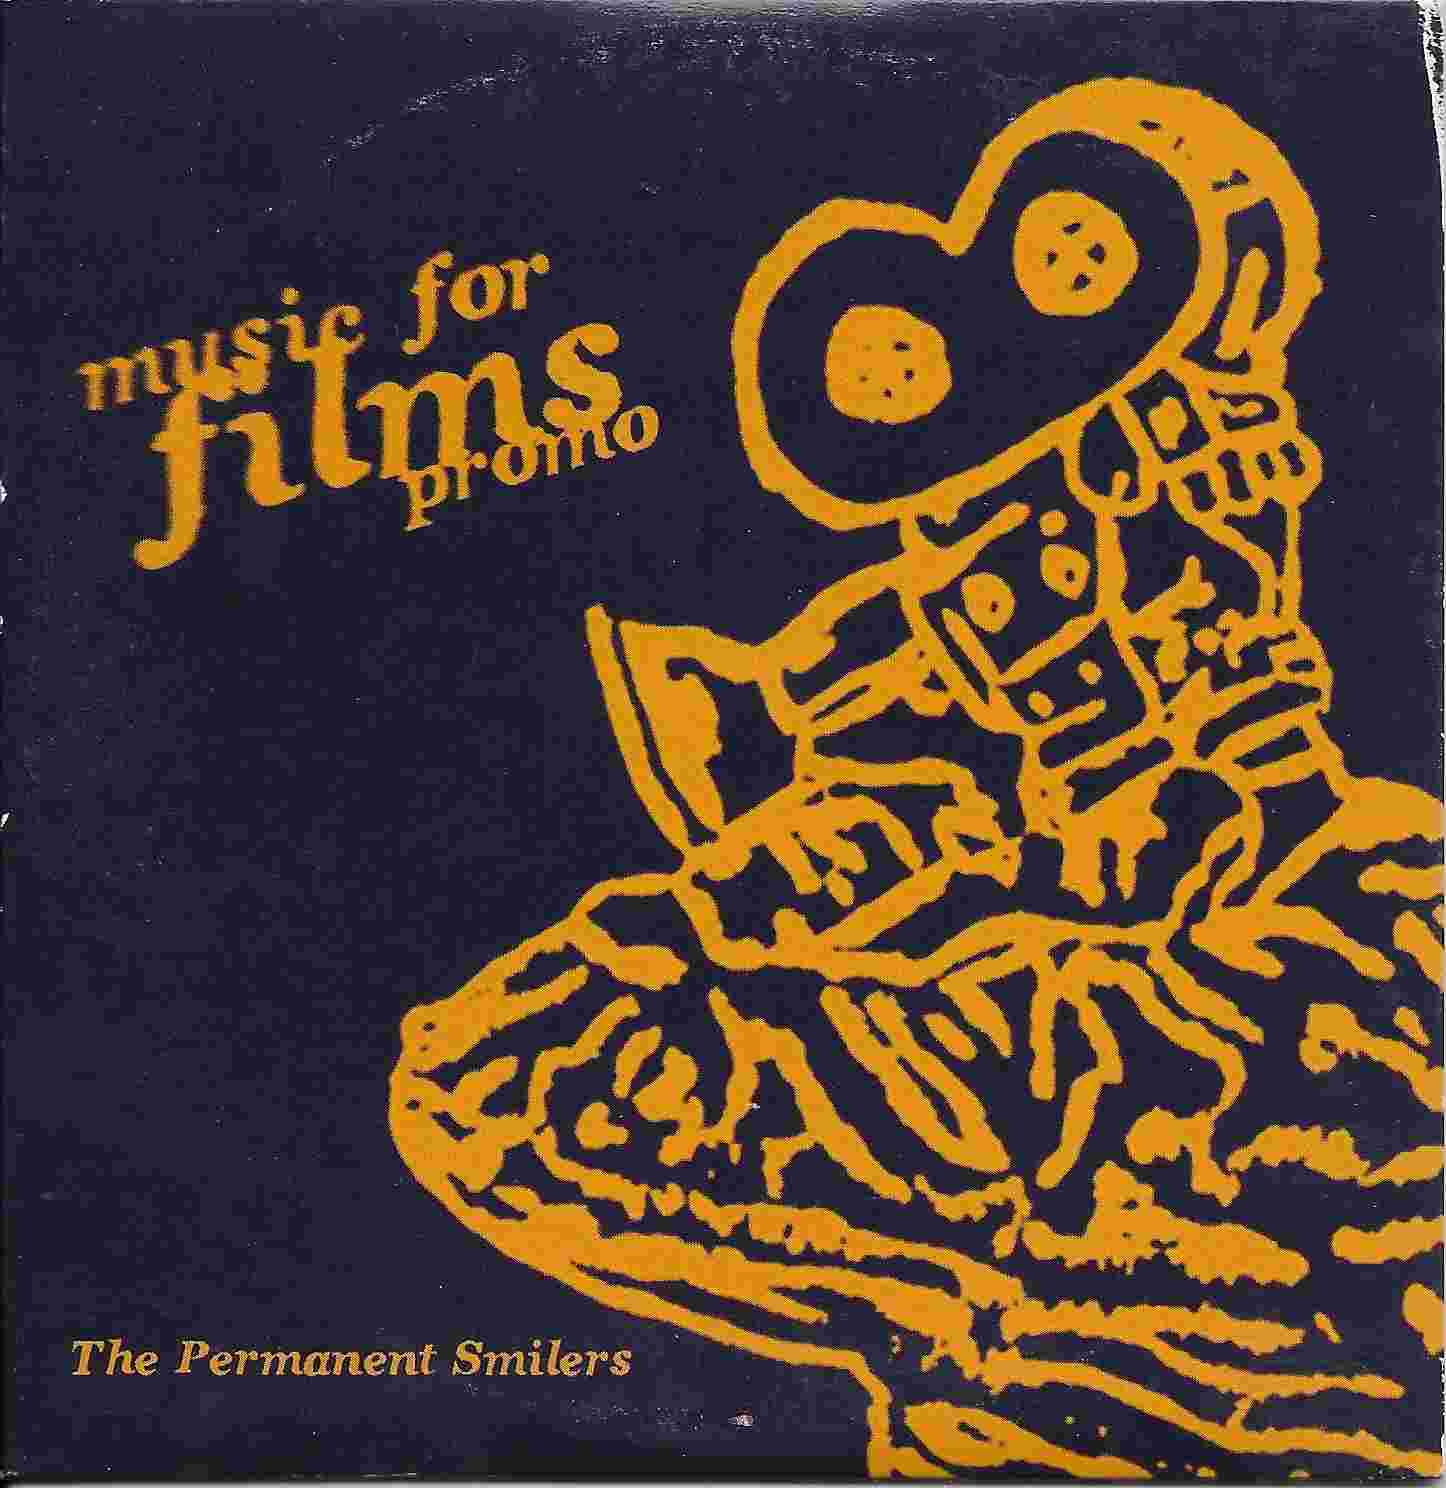 Picture of Music for films promo by artist The Permanent Smilers  